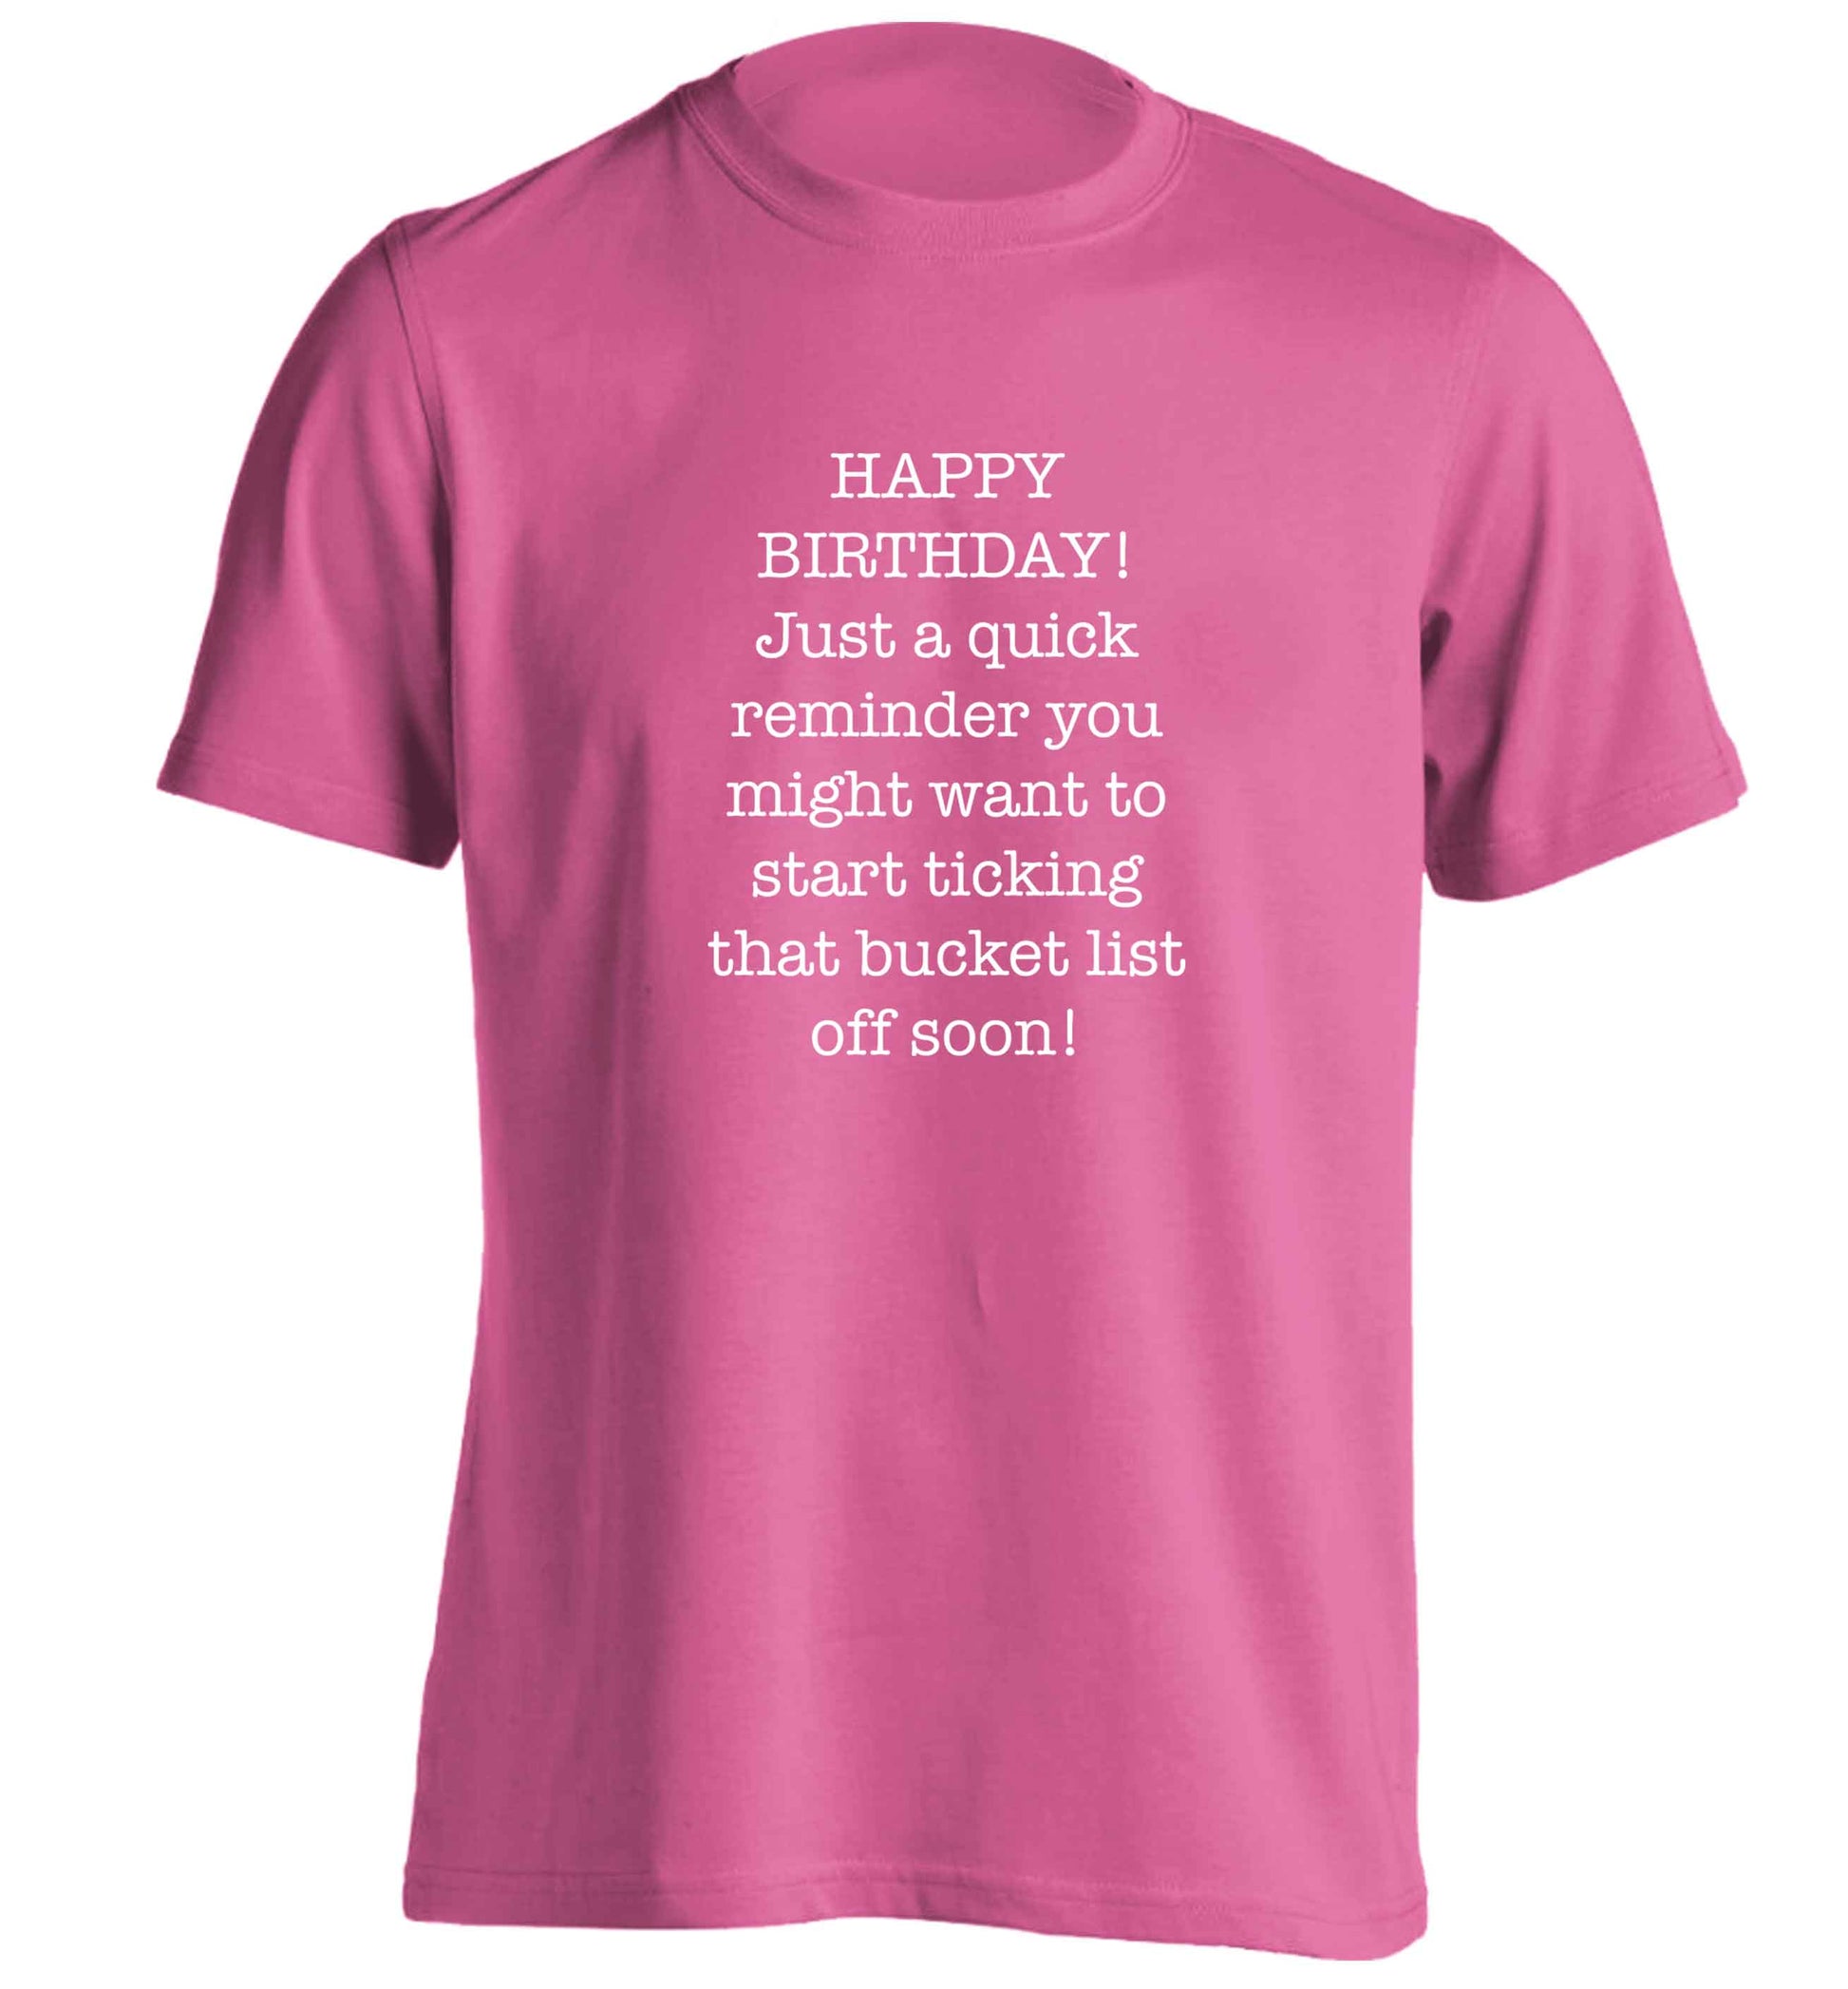 Happy birthday, just a quick reminder you might want to start ticking that bucket list off soon adults unisex pink Tshirt 2XL